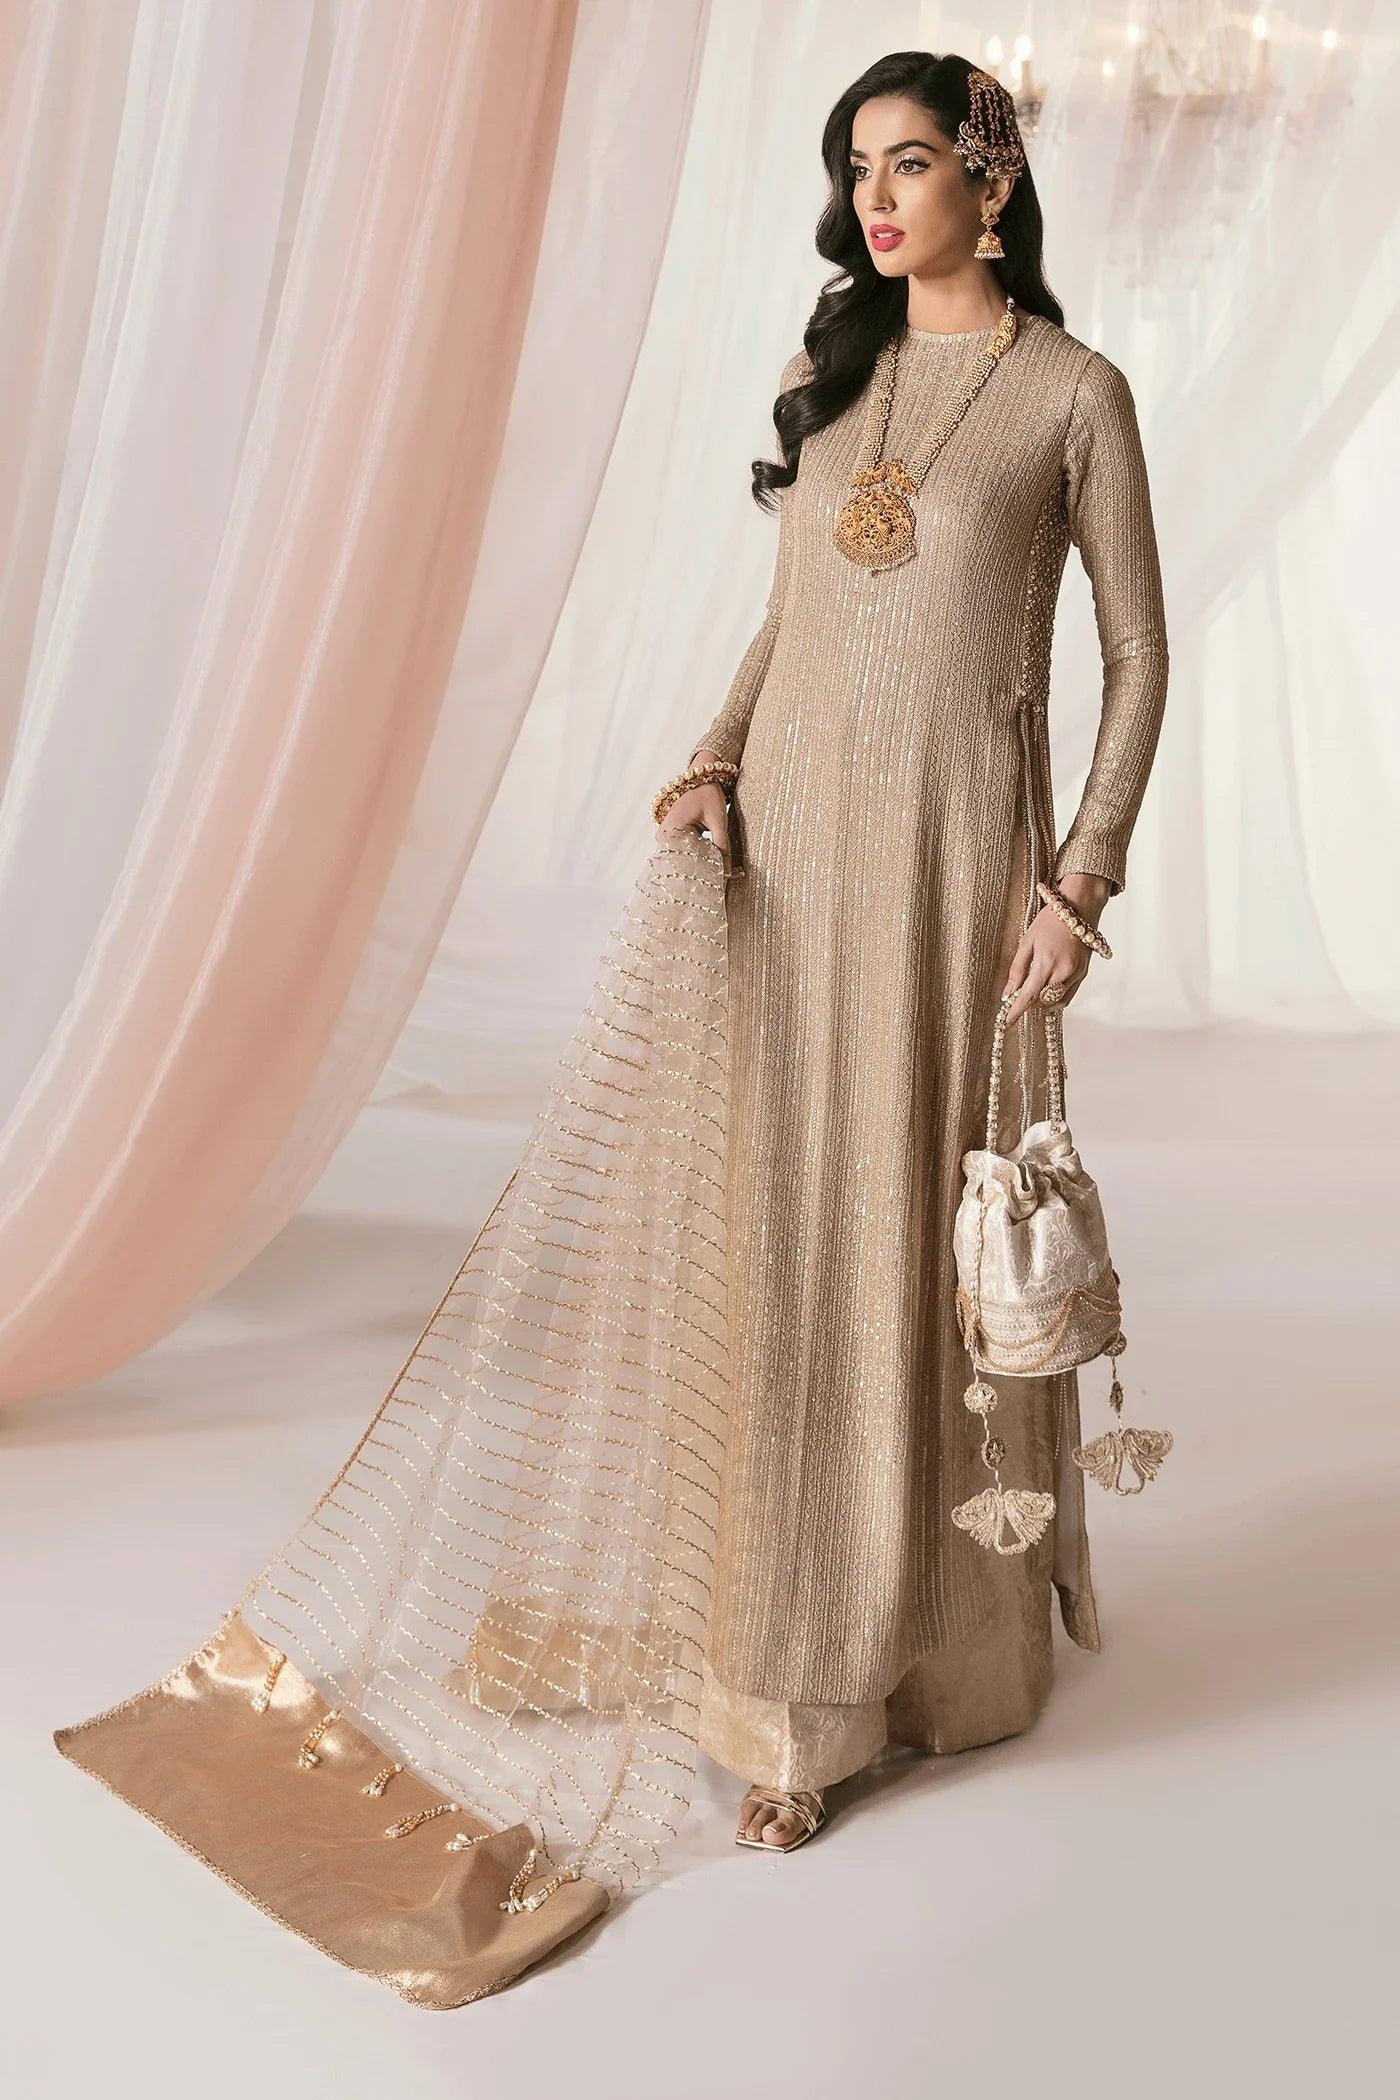 Nilofer Shahid ECSTASY - MEERAS Luxury Pure Chiffon Collection 3 Pieces Unstitched - Yumnaz